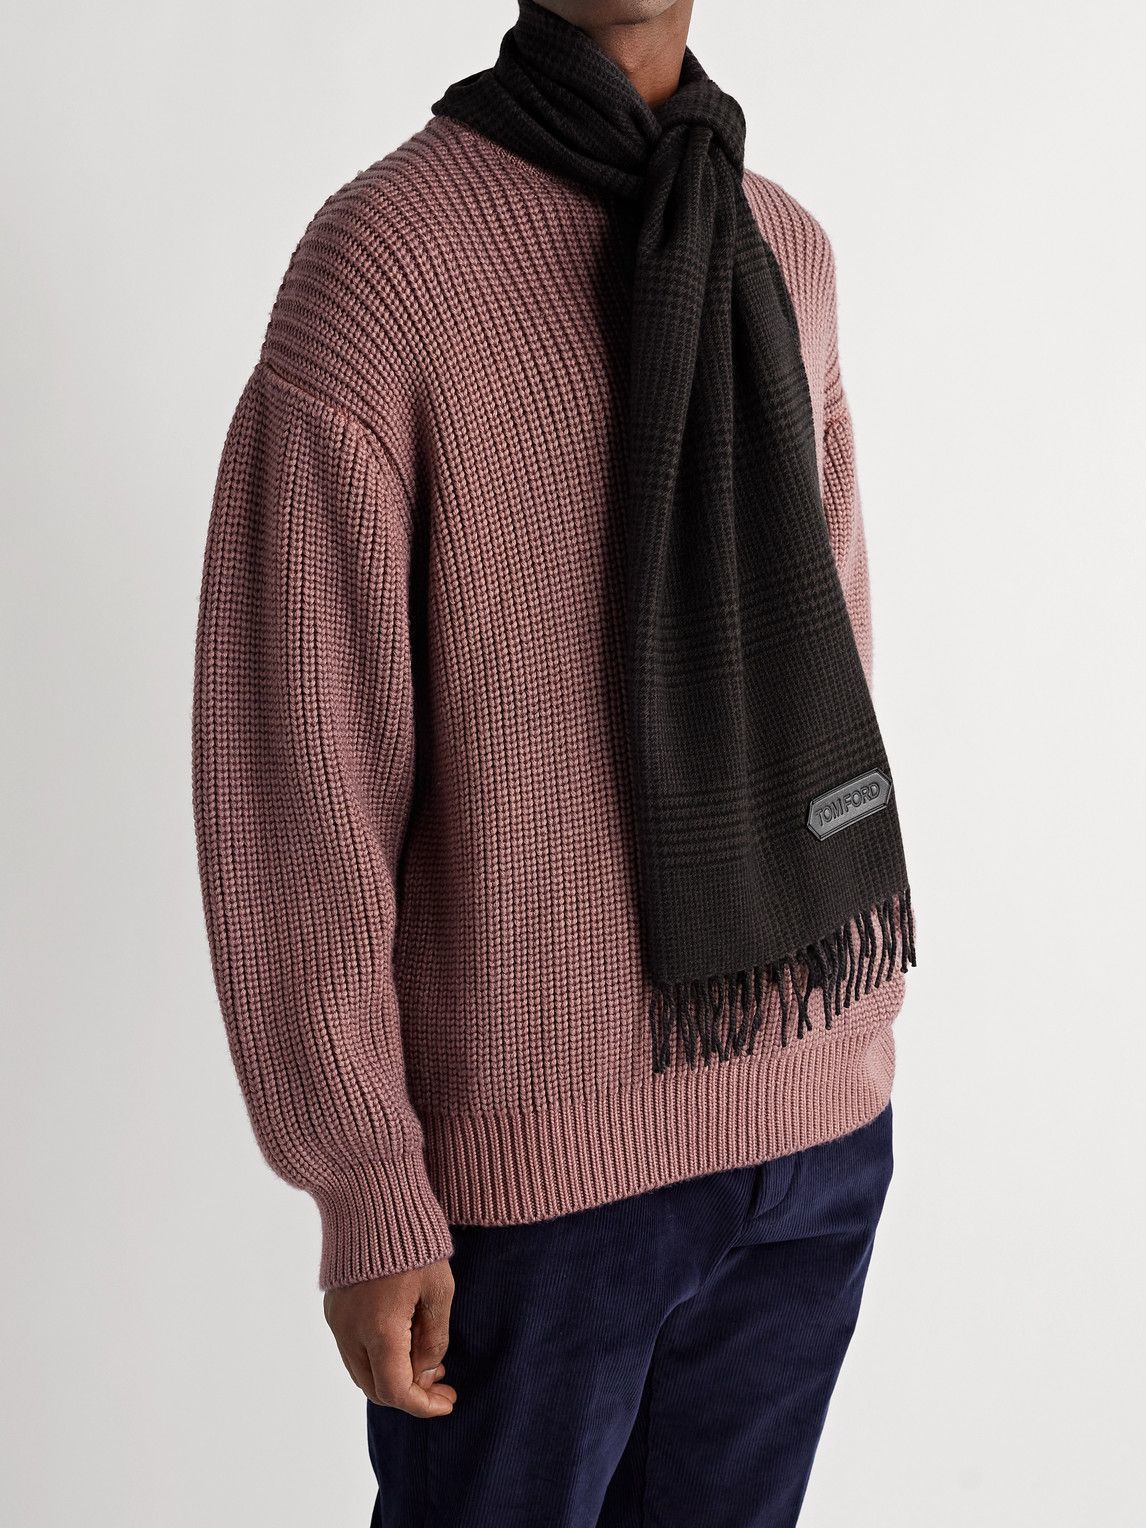 TOM FORD - Logo-Appliquéd Fringed Prince of Wales Checked Cashmere and  Wool-Blend Scarf TOM FORD